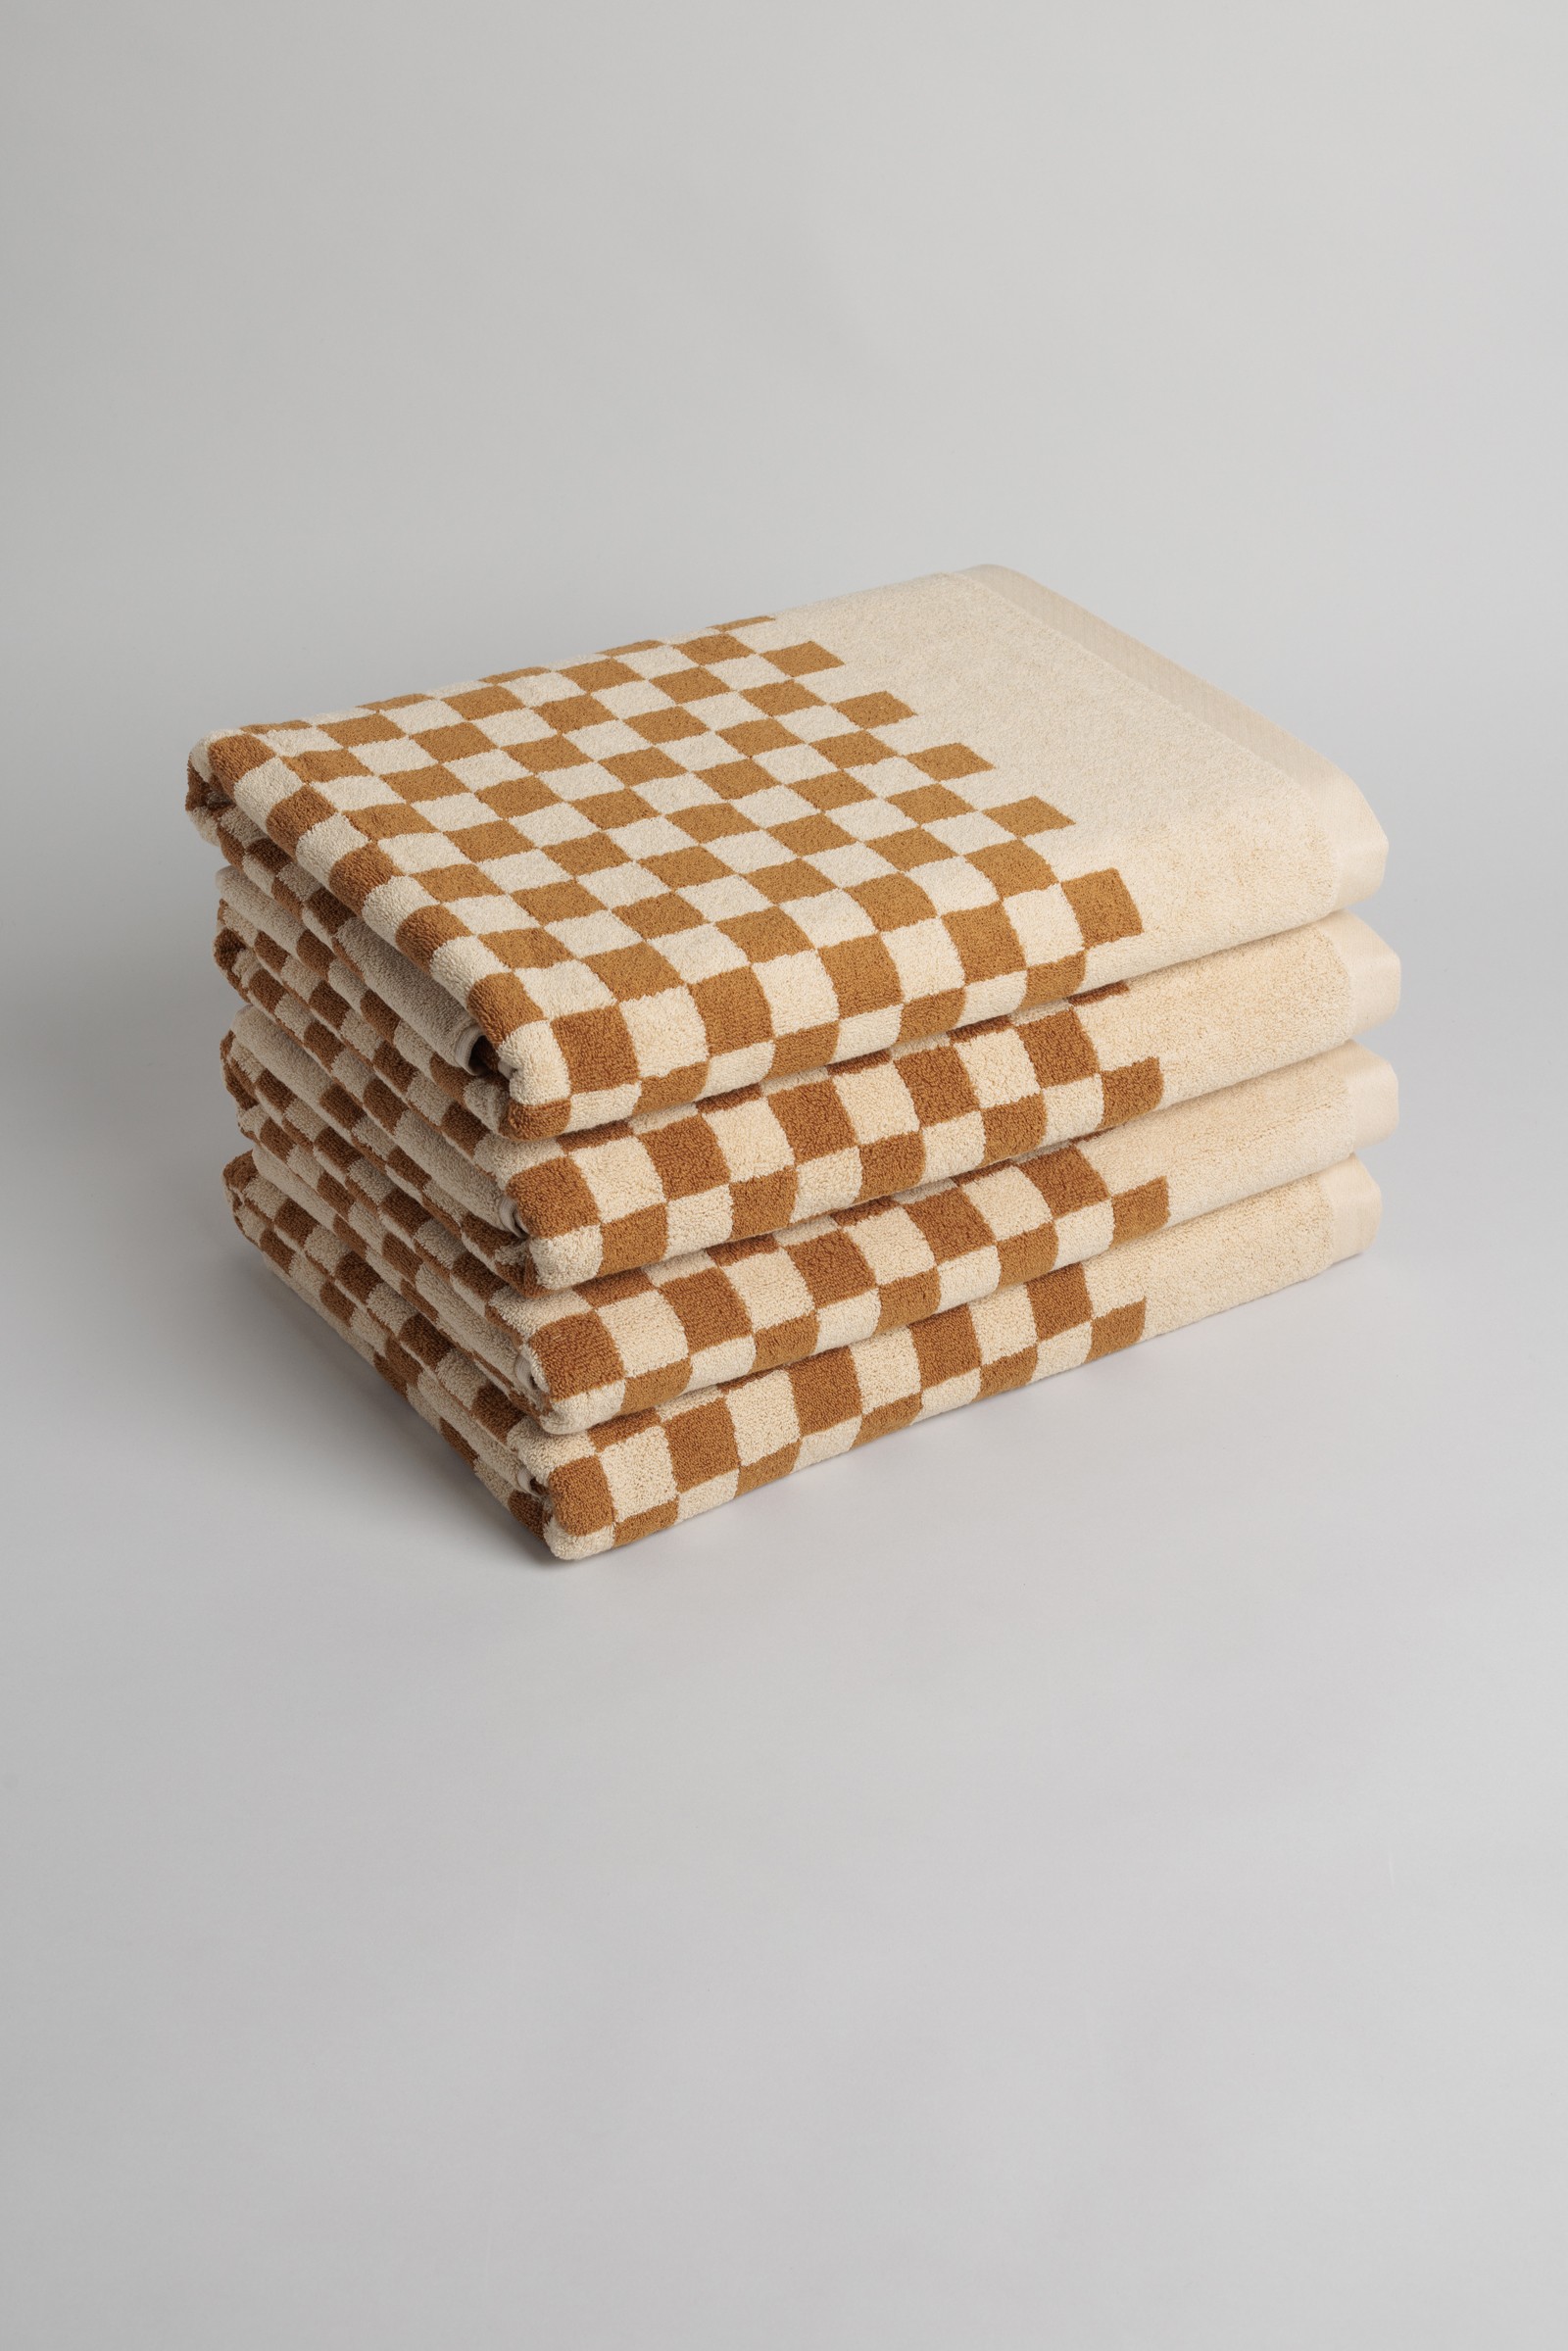 a stack of four brown and white checkered towels